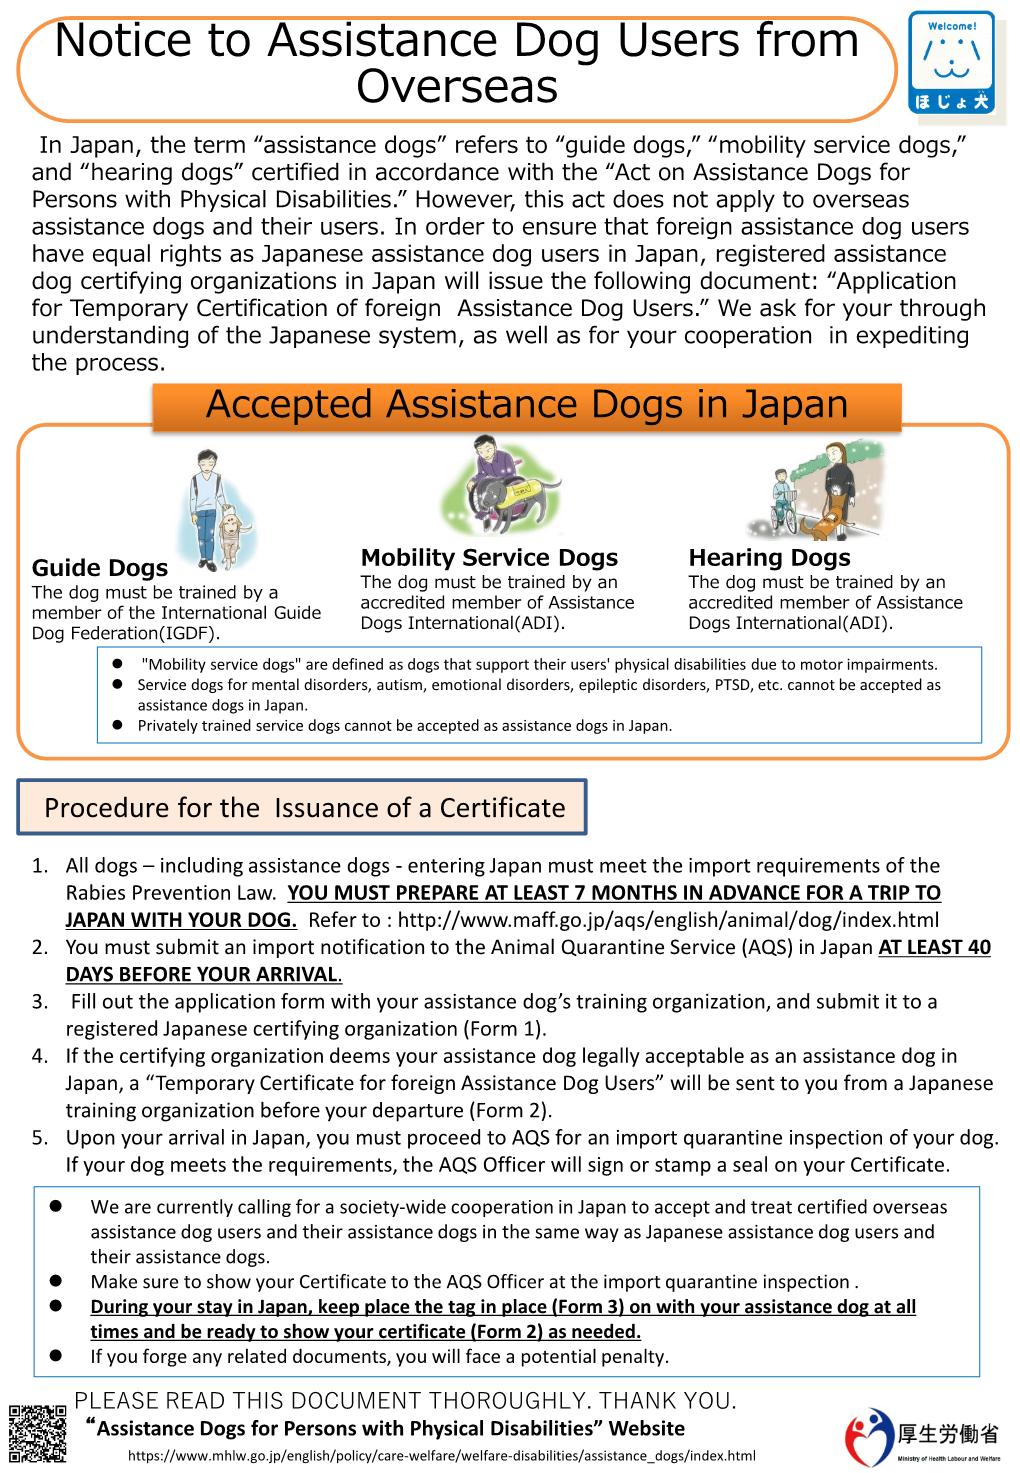 Notice to Assistance Dog Users from Overseas